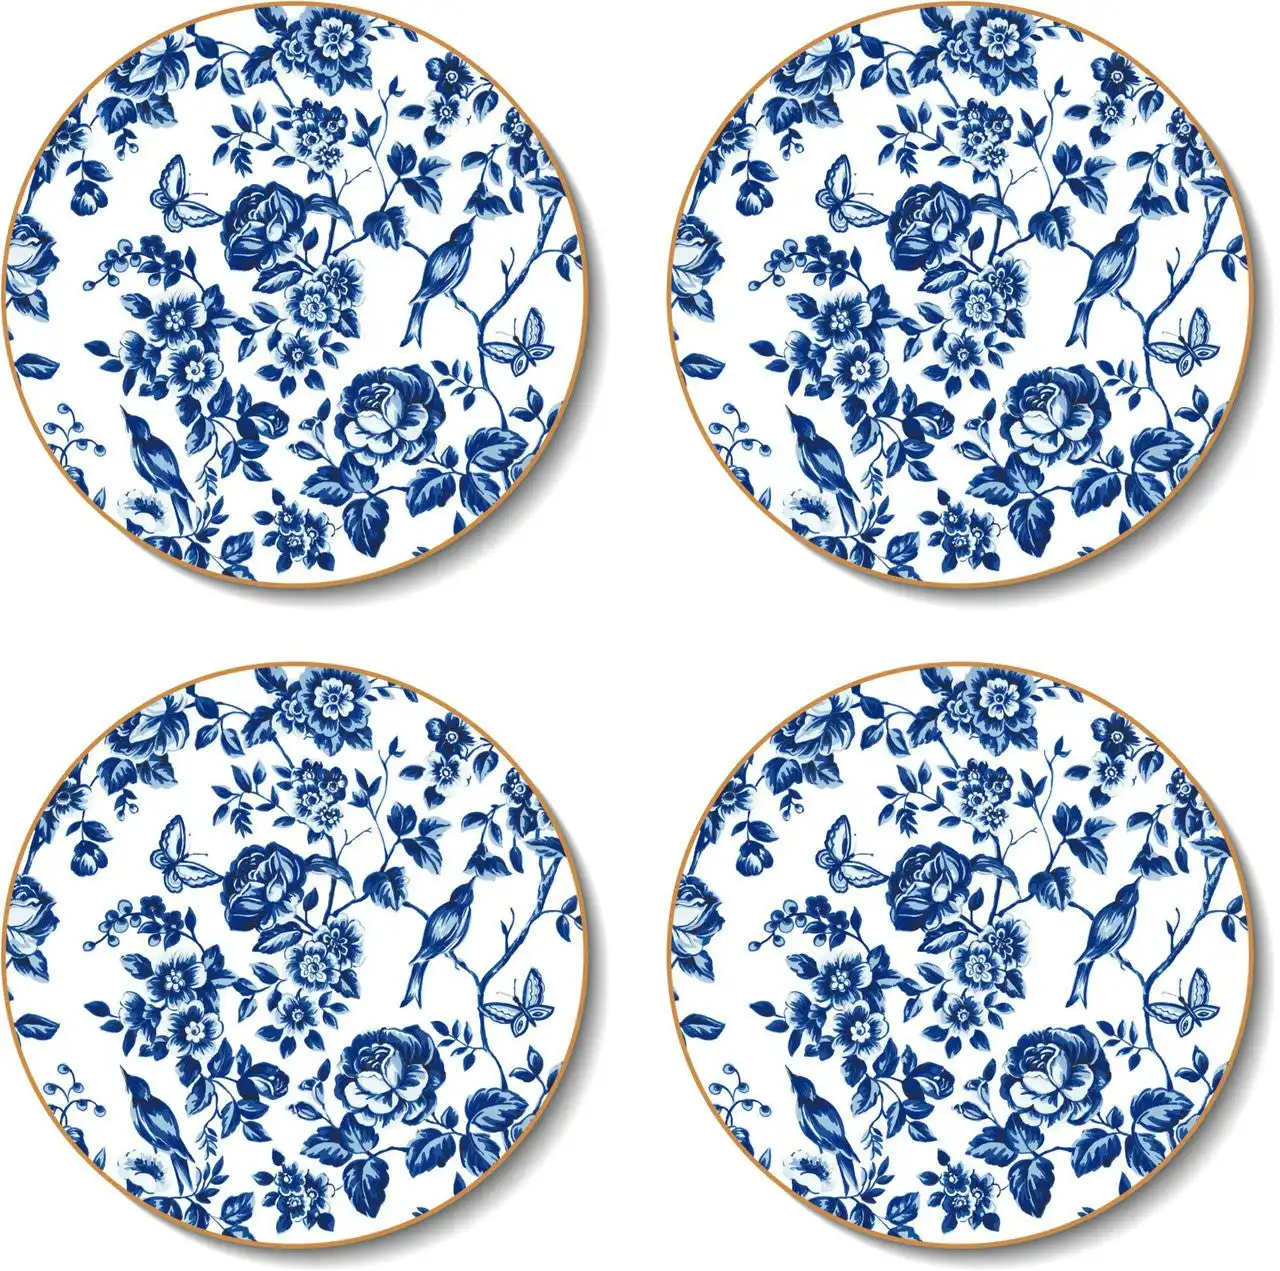 Cinnamon | Round French Rose Toile Coasters Set of 4